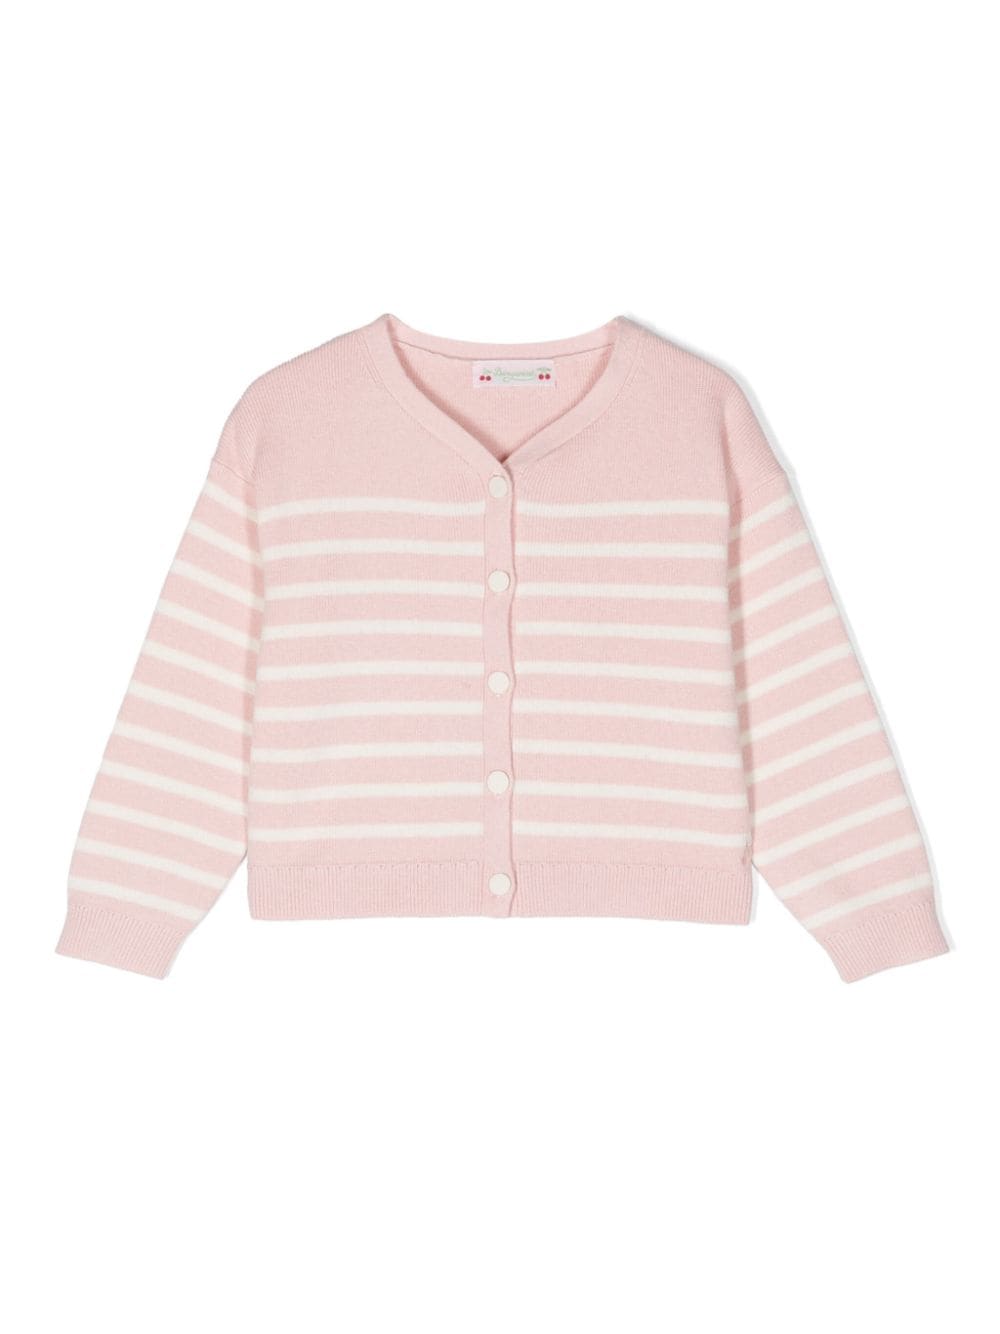 Bonpoint Kids' Demy Striped Cardigan In Rosa